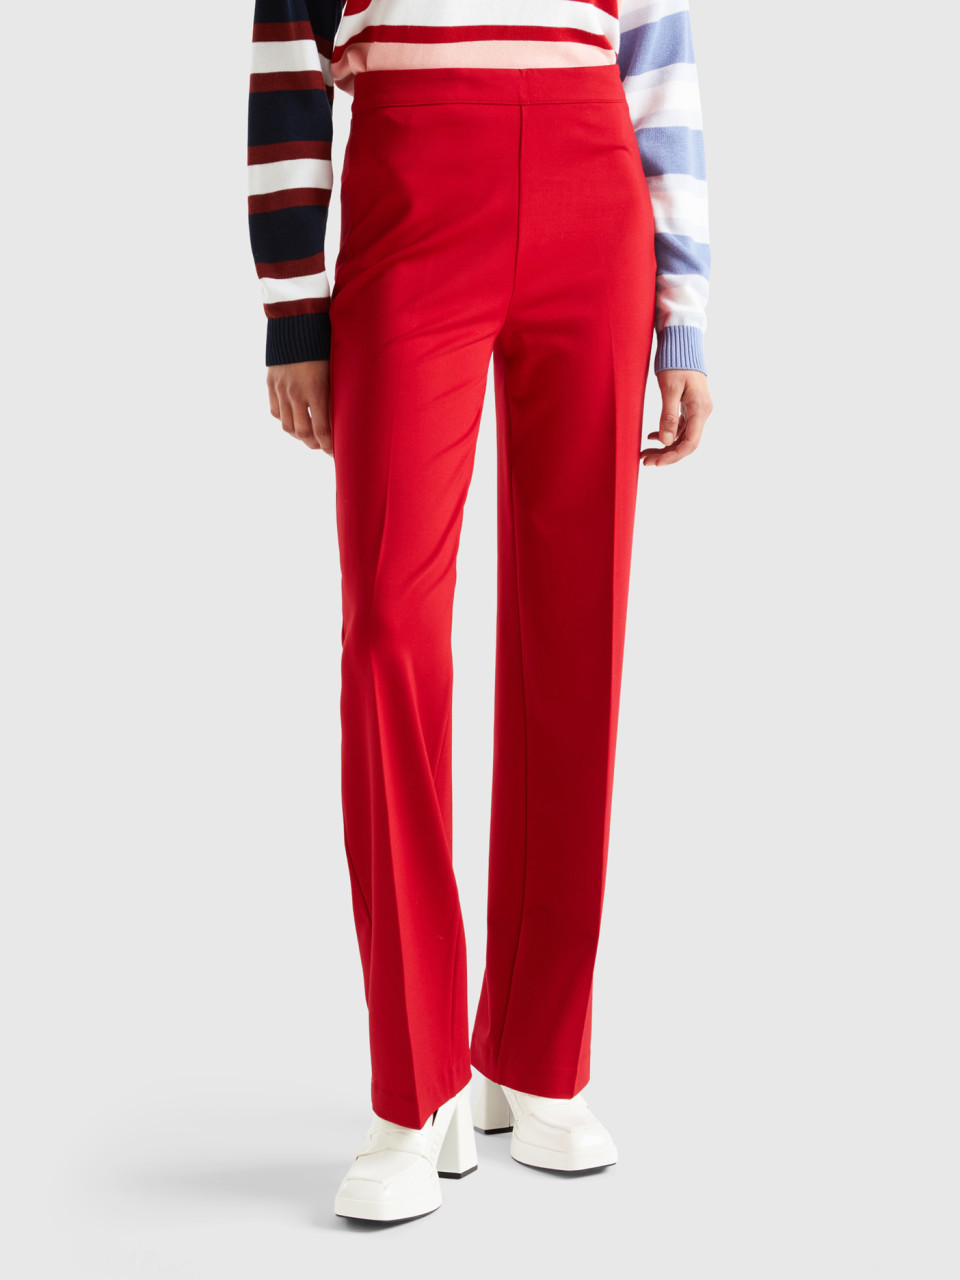 Benetton, Straight Cut Classic Trousers, Red, Women